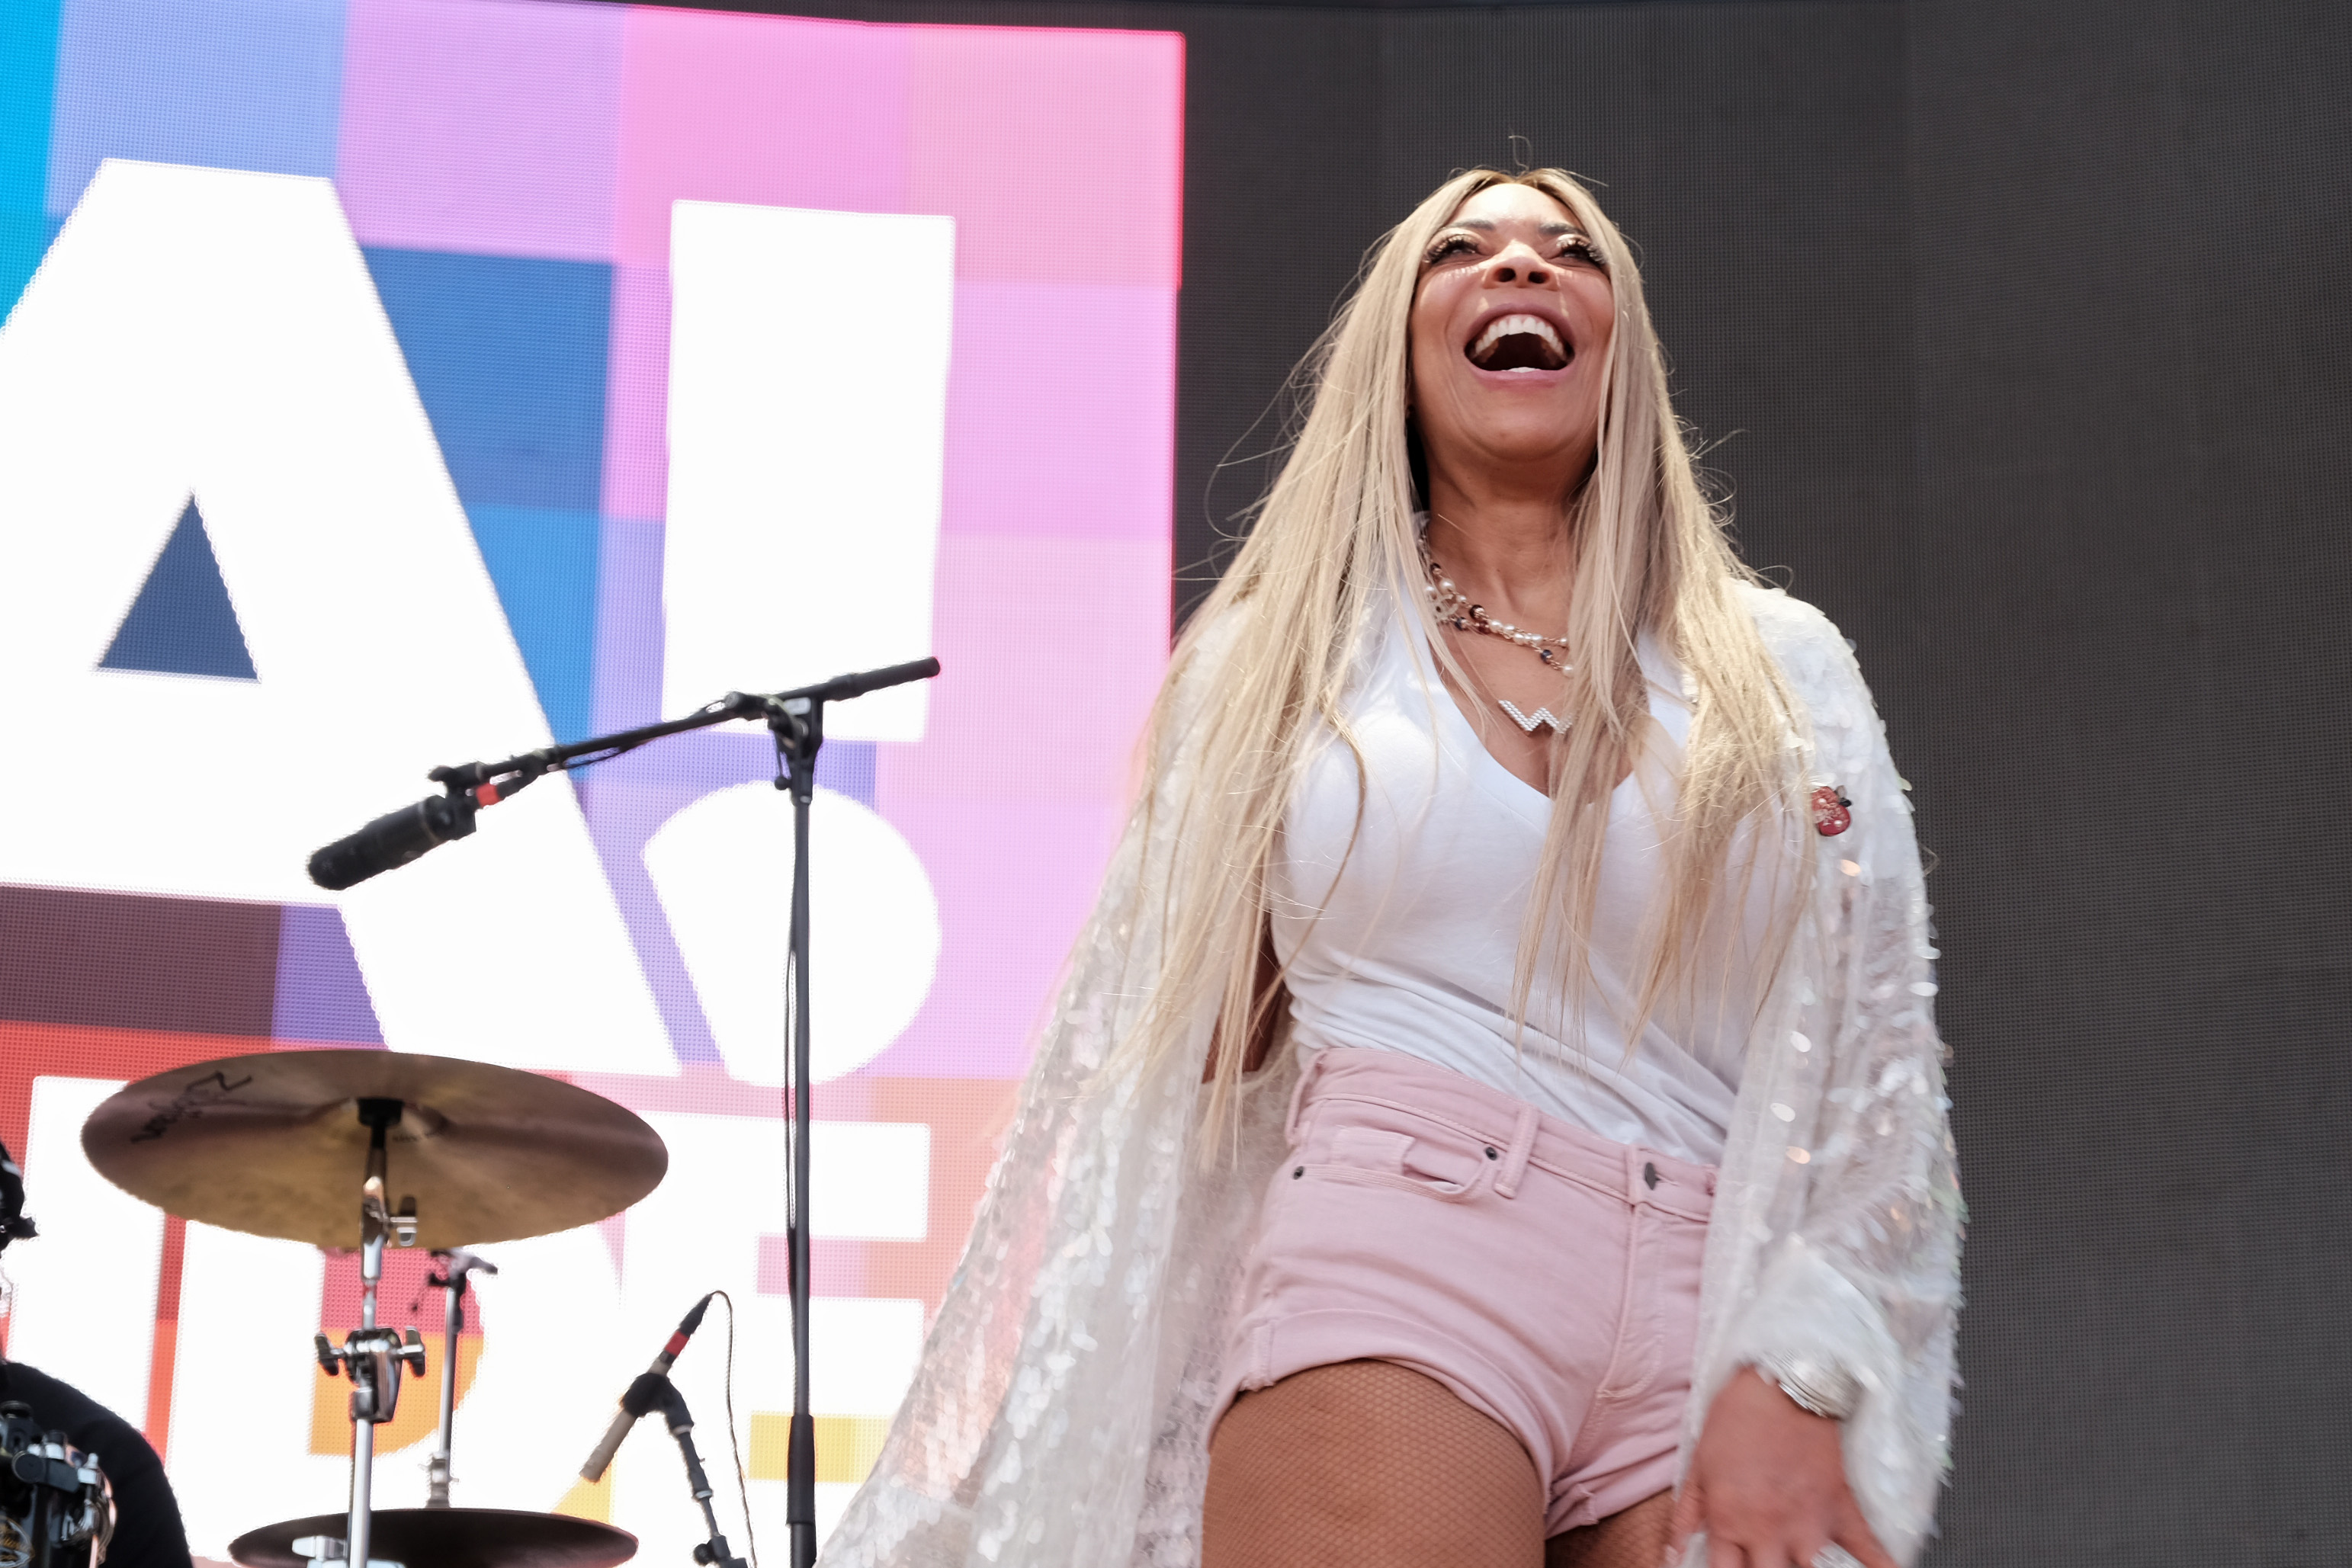 Wendy Williams attends LA Pride 2019 on June 8, 2019 in West Hollywood, California. | Source: Getty Images